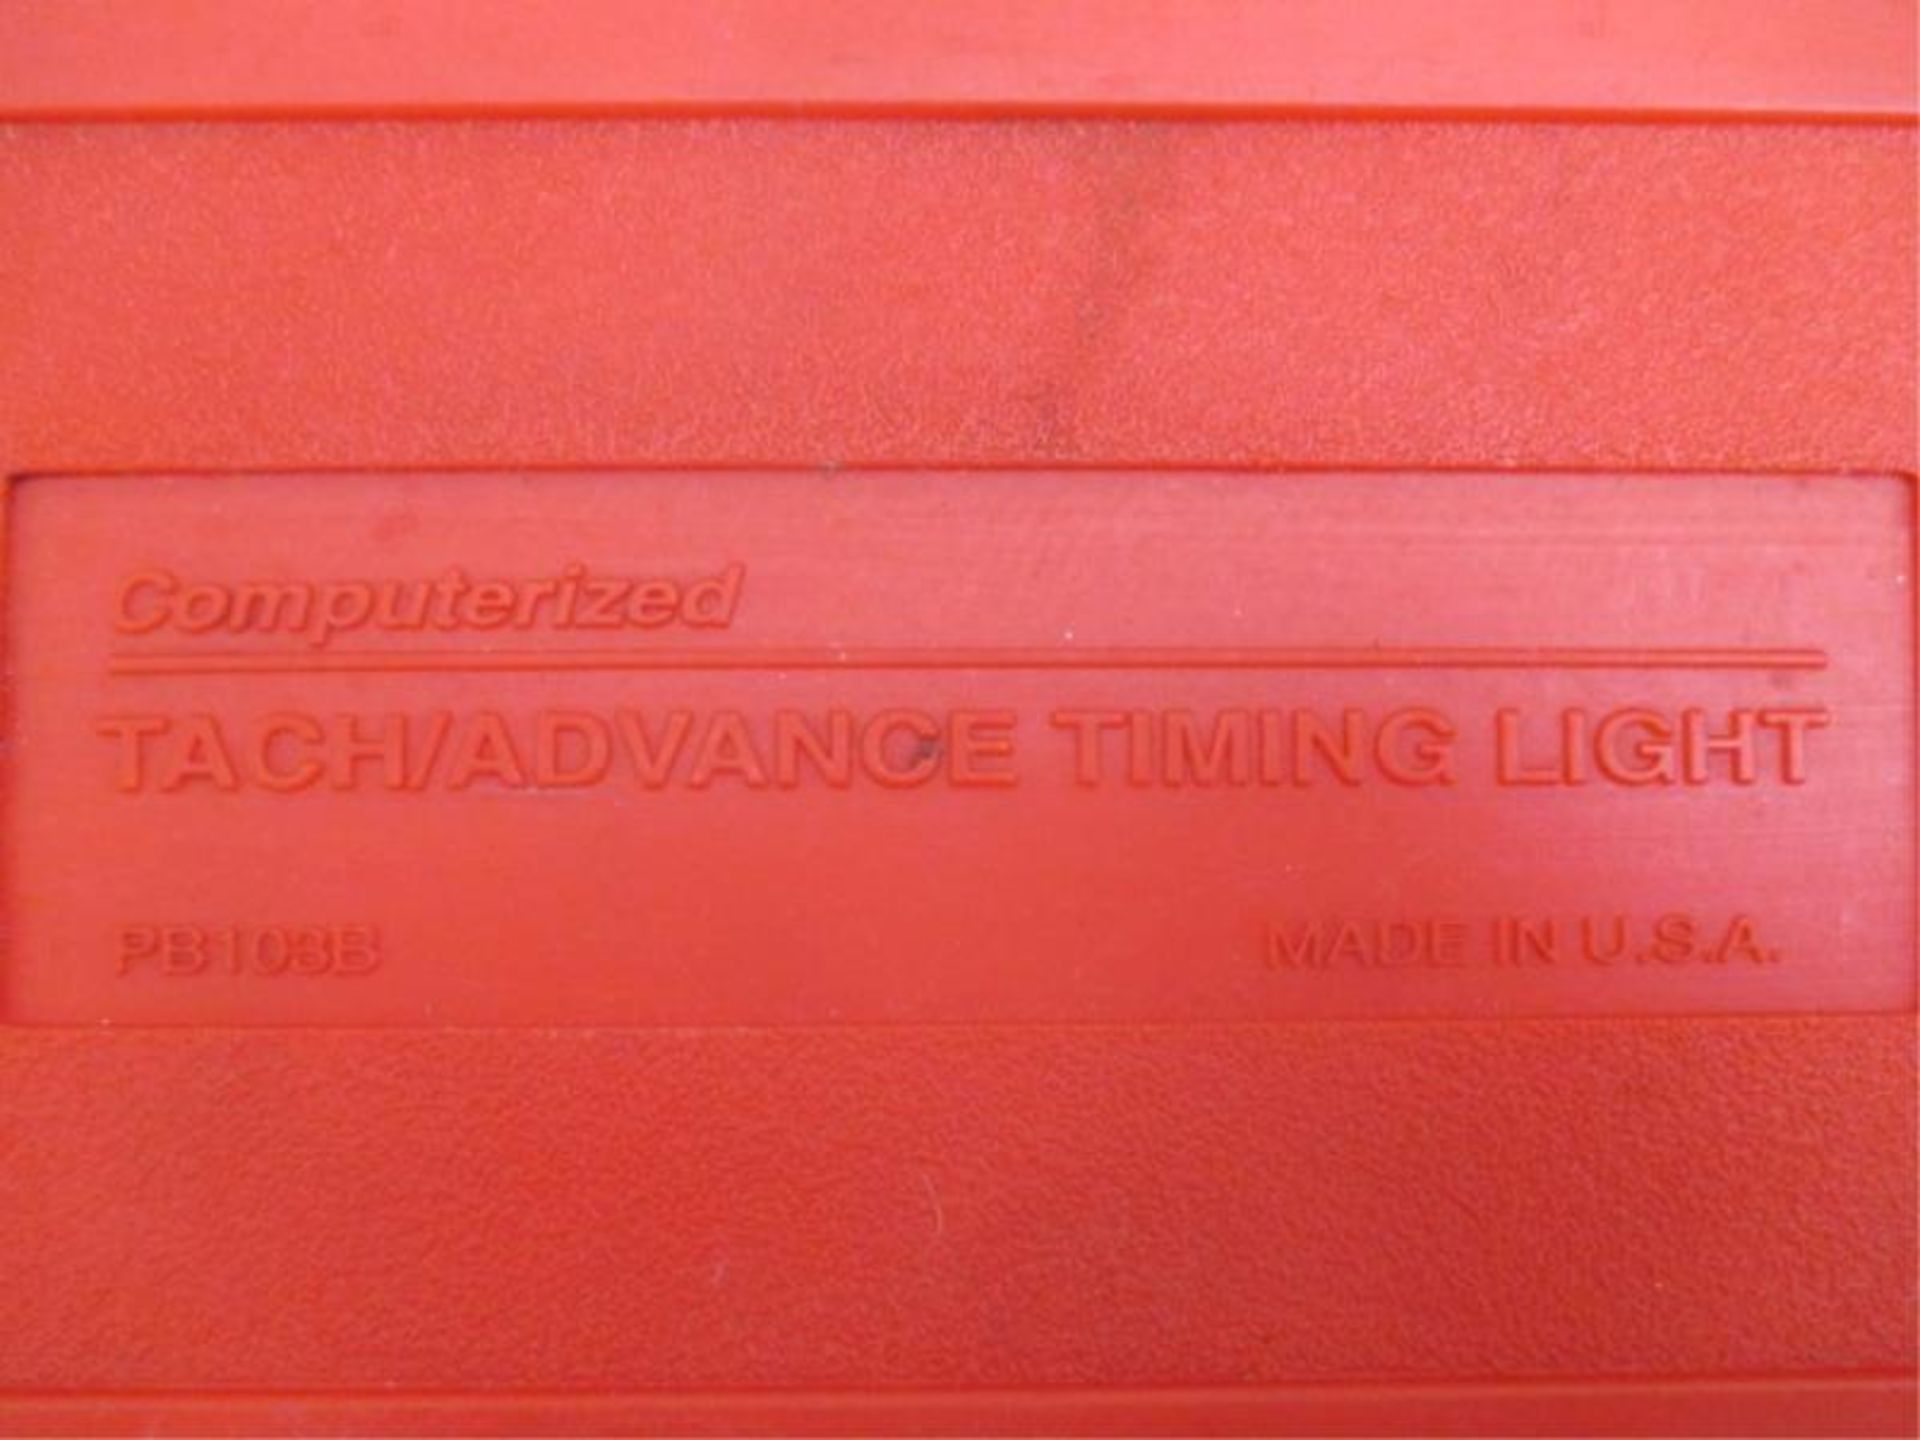 Timing / Advance Light, Snap-On, Model: MT1241, SN: 00100498 in Red Case SN: 00100498 in Red Case - Image 7 of 7